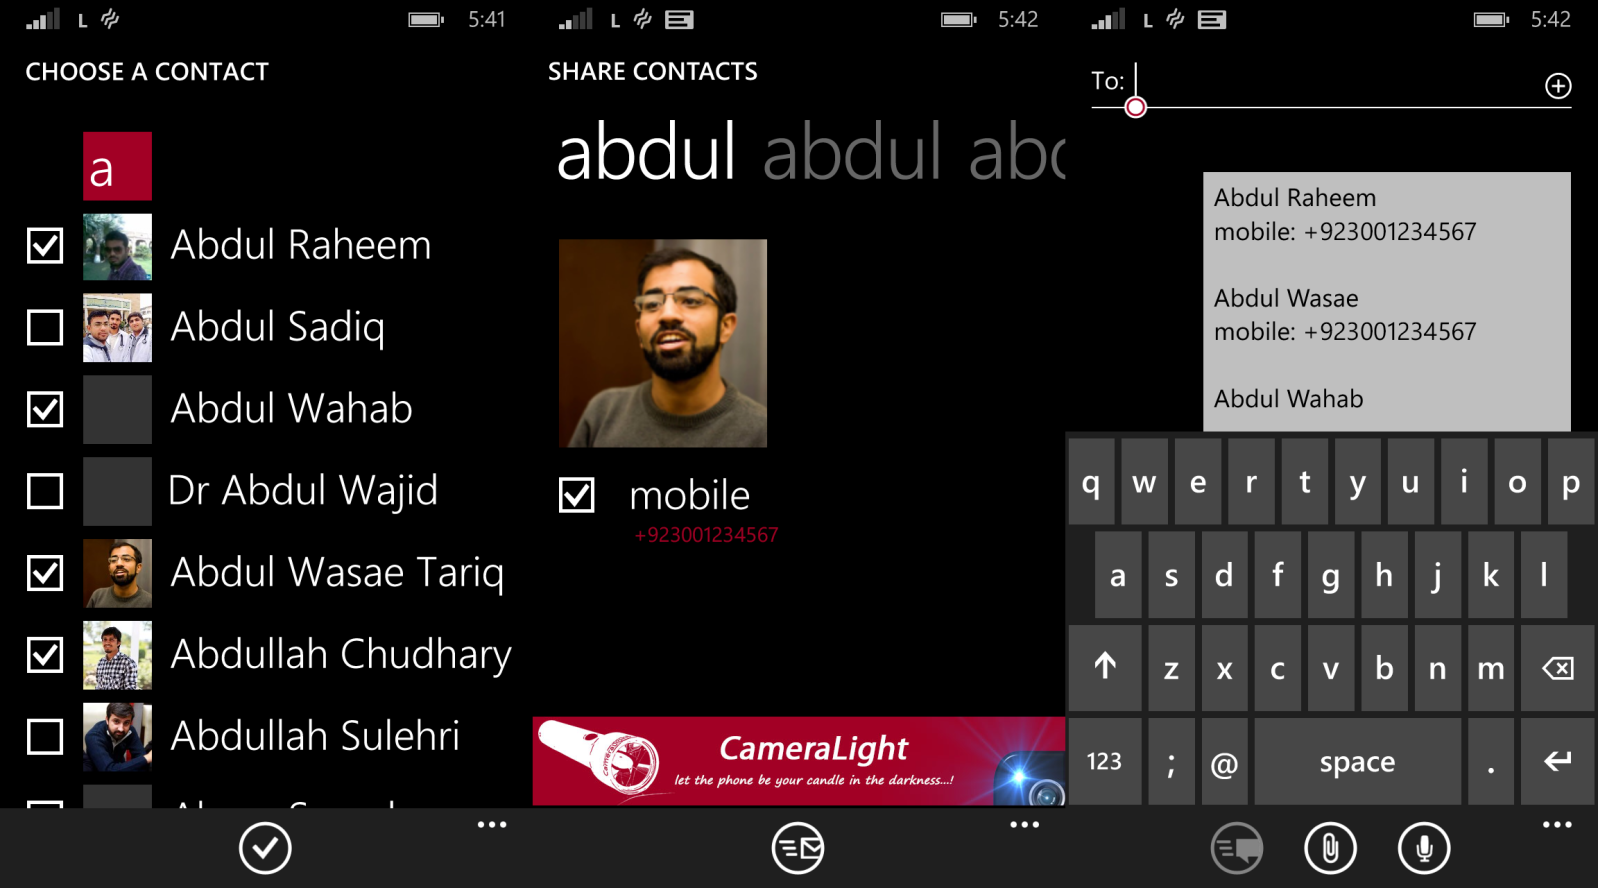 share contacts